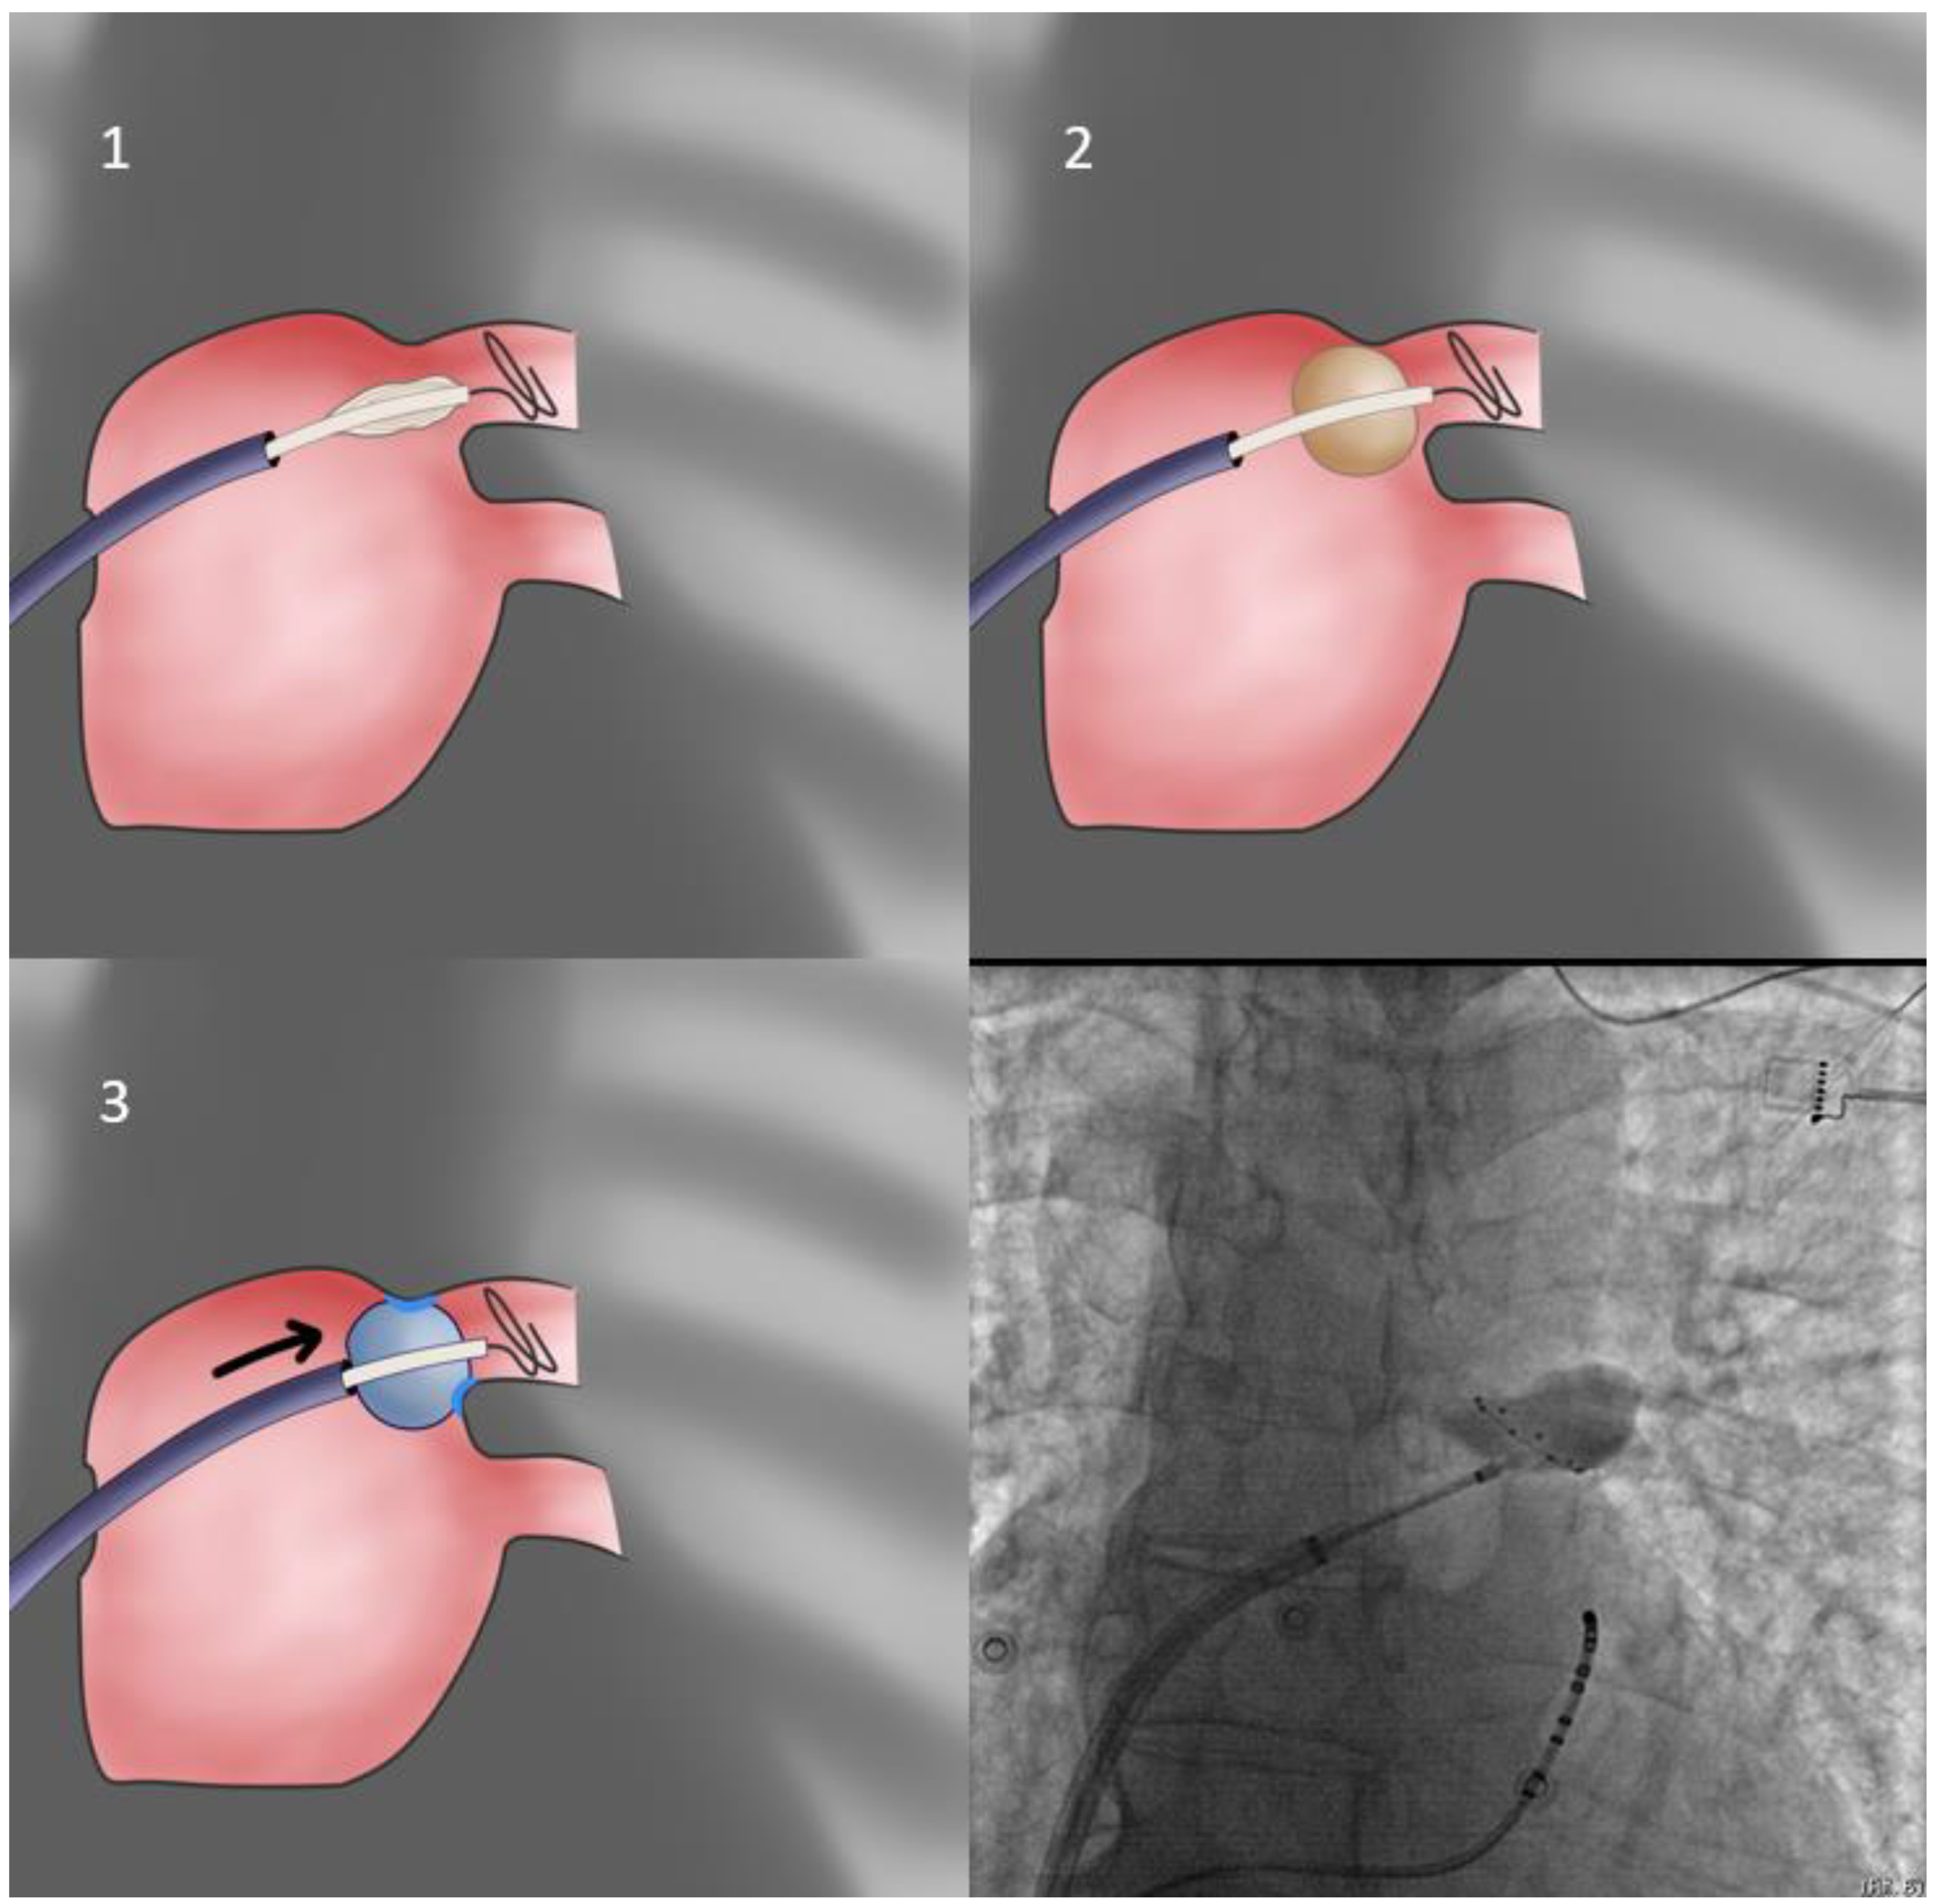 JCDD | Free Full-Text | Best Practice Guide for Cryoballoon Ablation in  Atrial Fibrillation: The Compilation Experience of More than 1000 Procedures